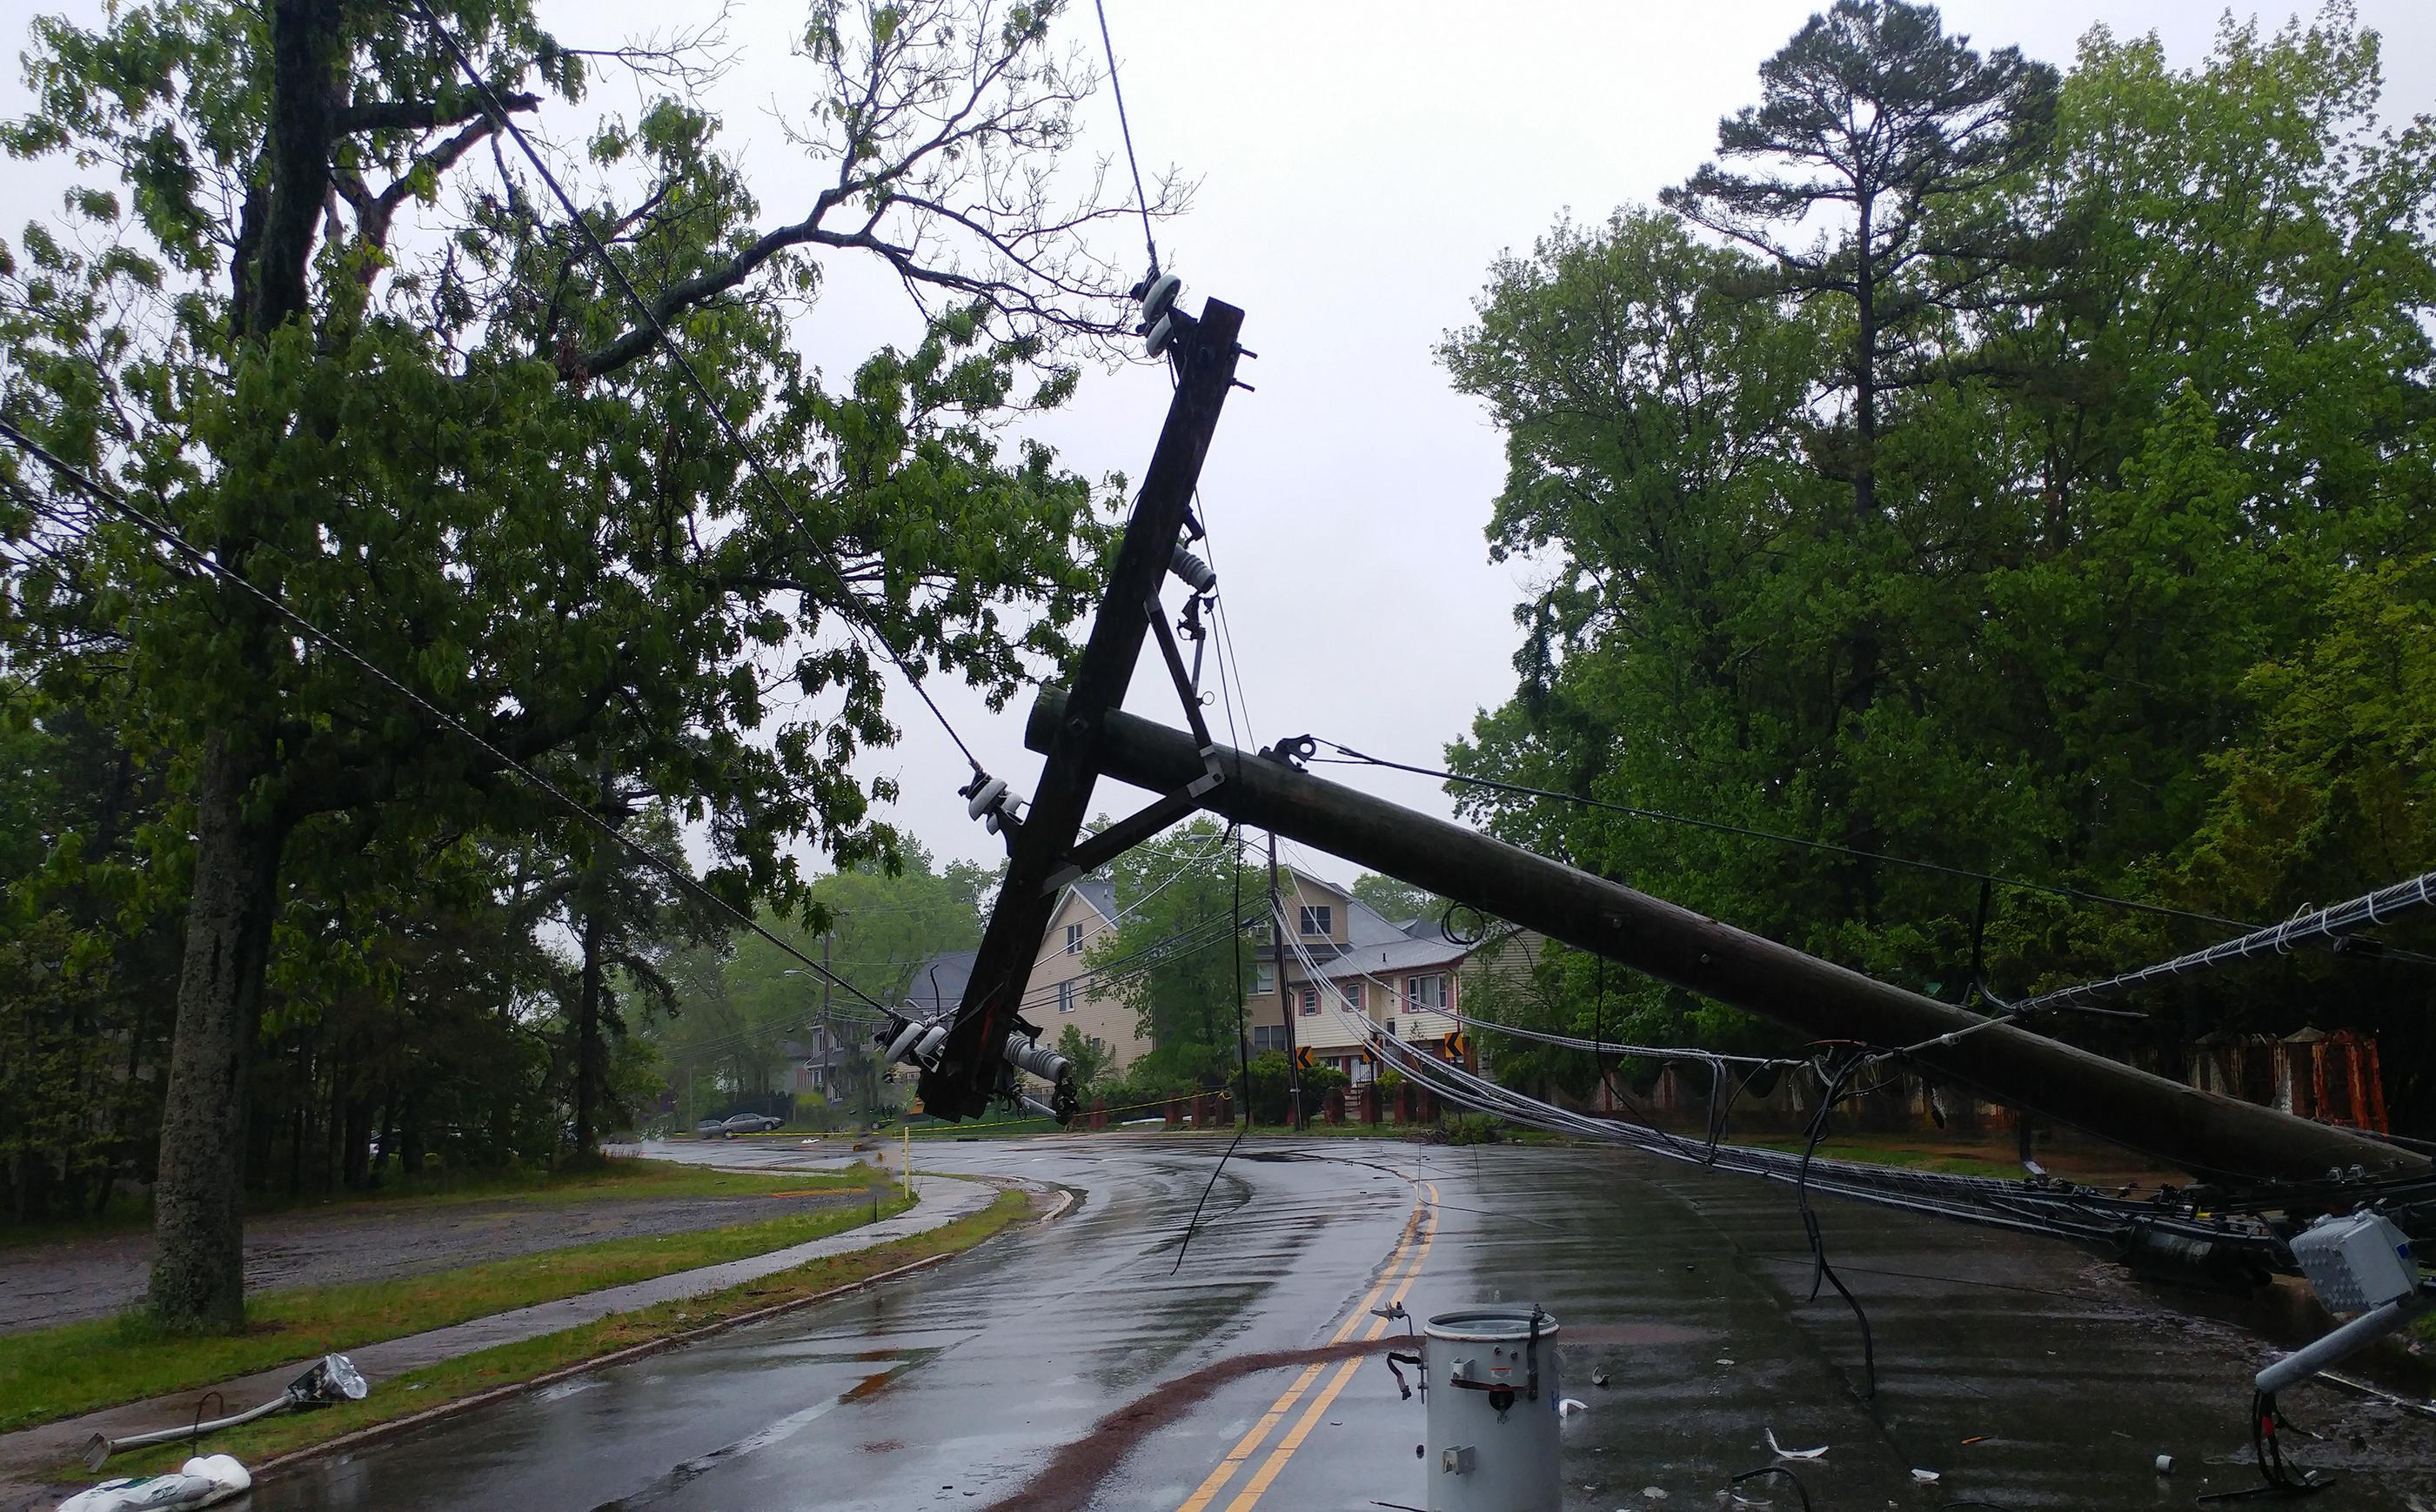 Emergency electrical services can help repair parts damaged in a storm